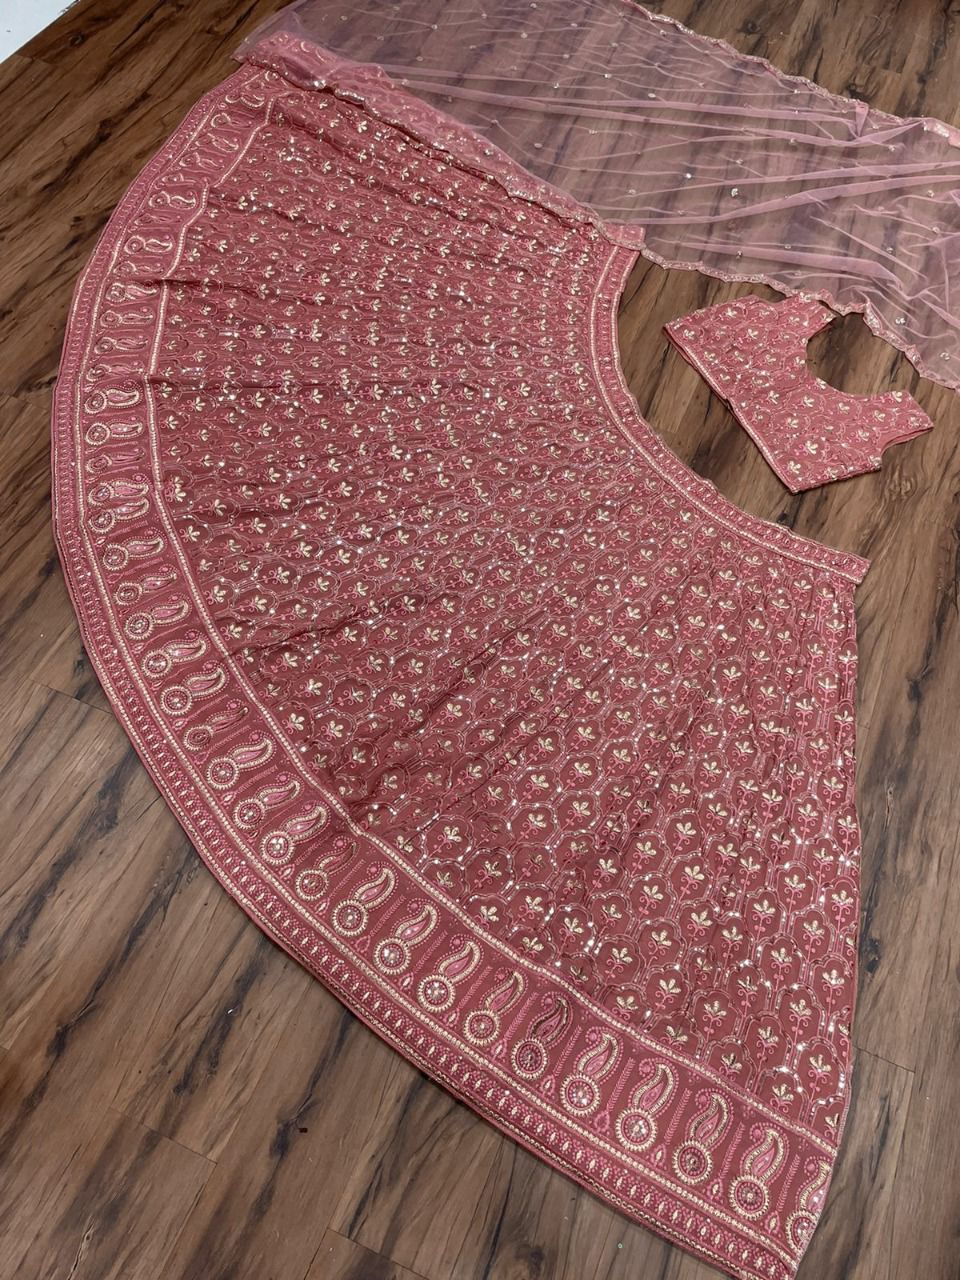 Dusty Pink color designer embroidery sequence work lehenga choli